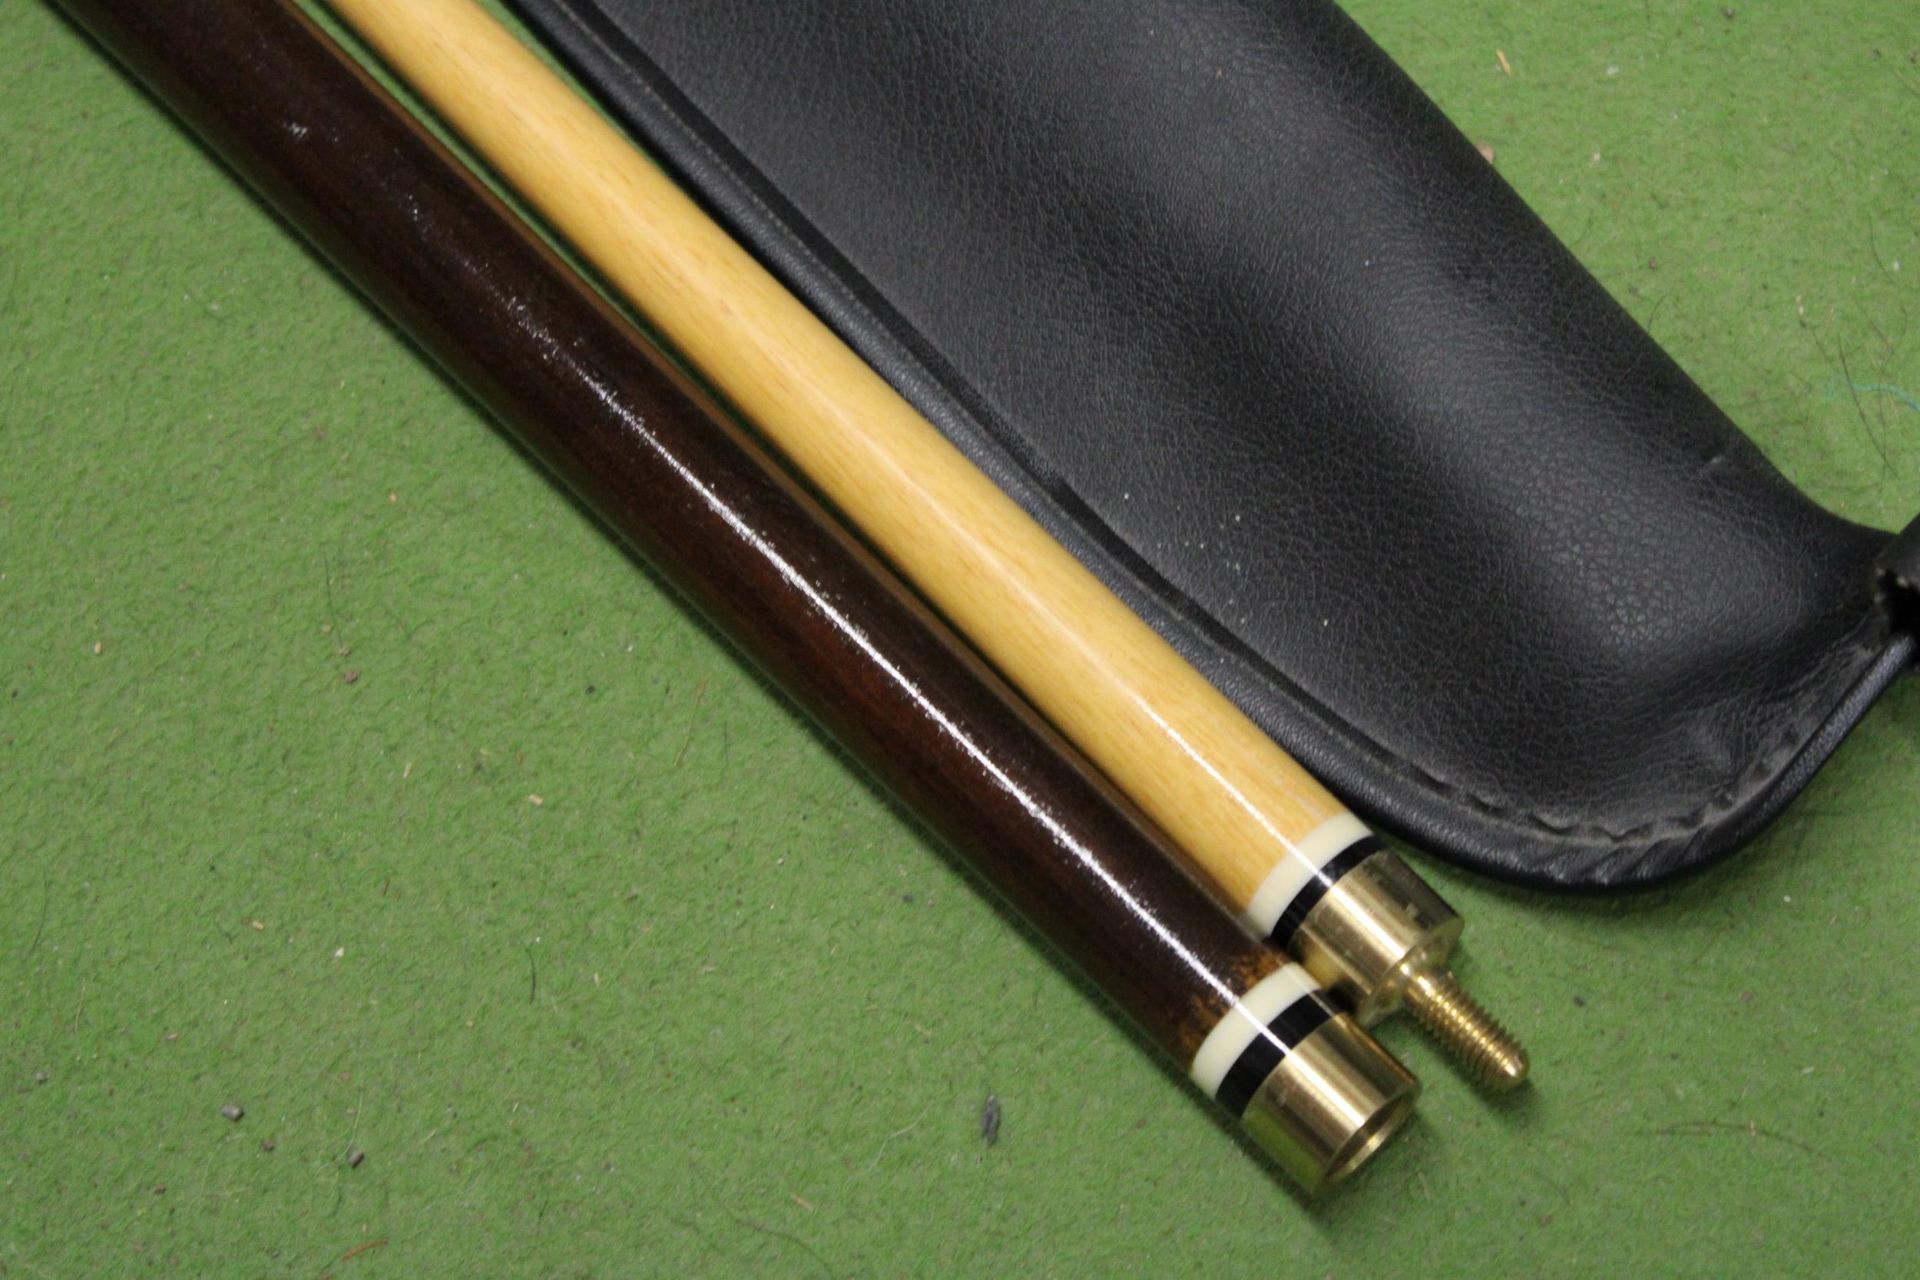 A BCE POOL/SNOOKER CUE IN A SOFT CASE - Image 3 of 6